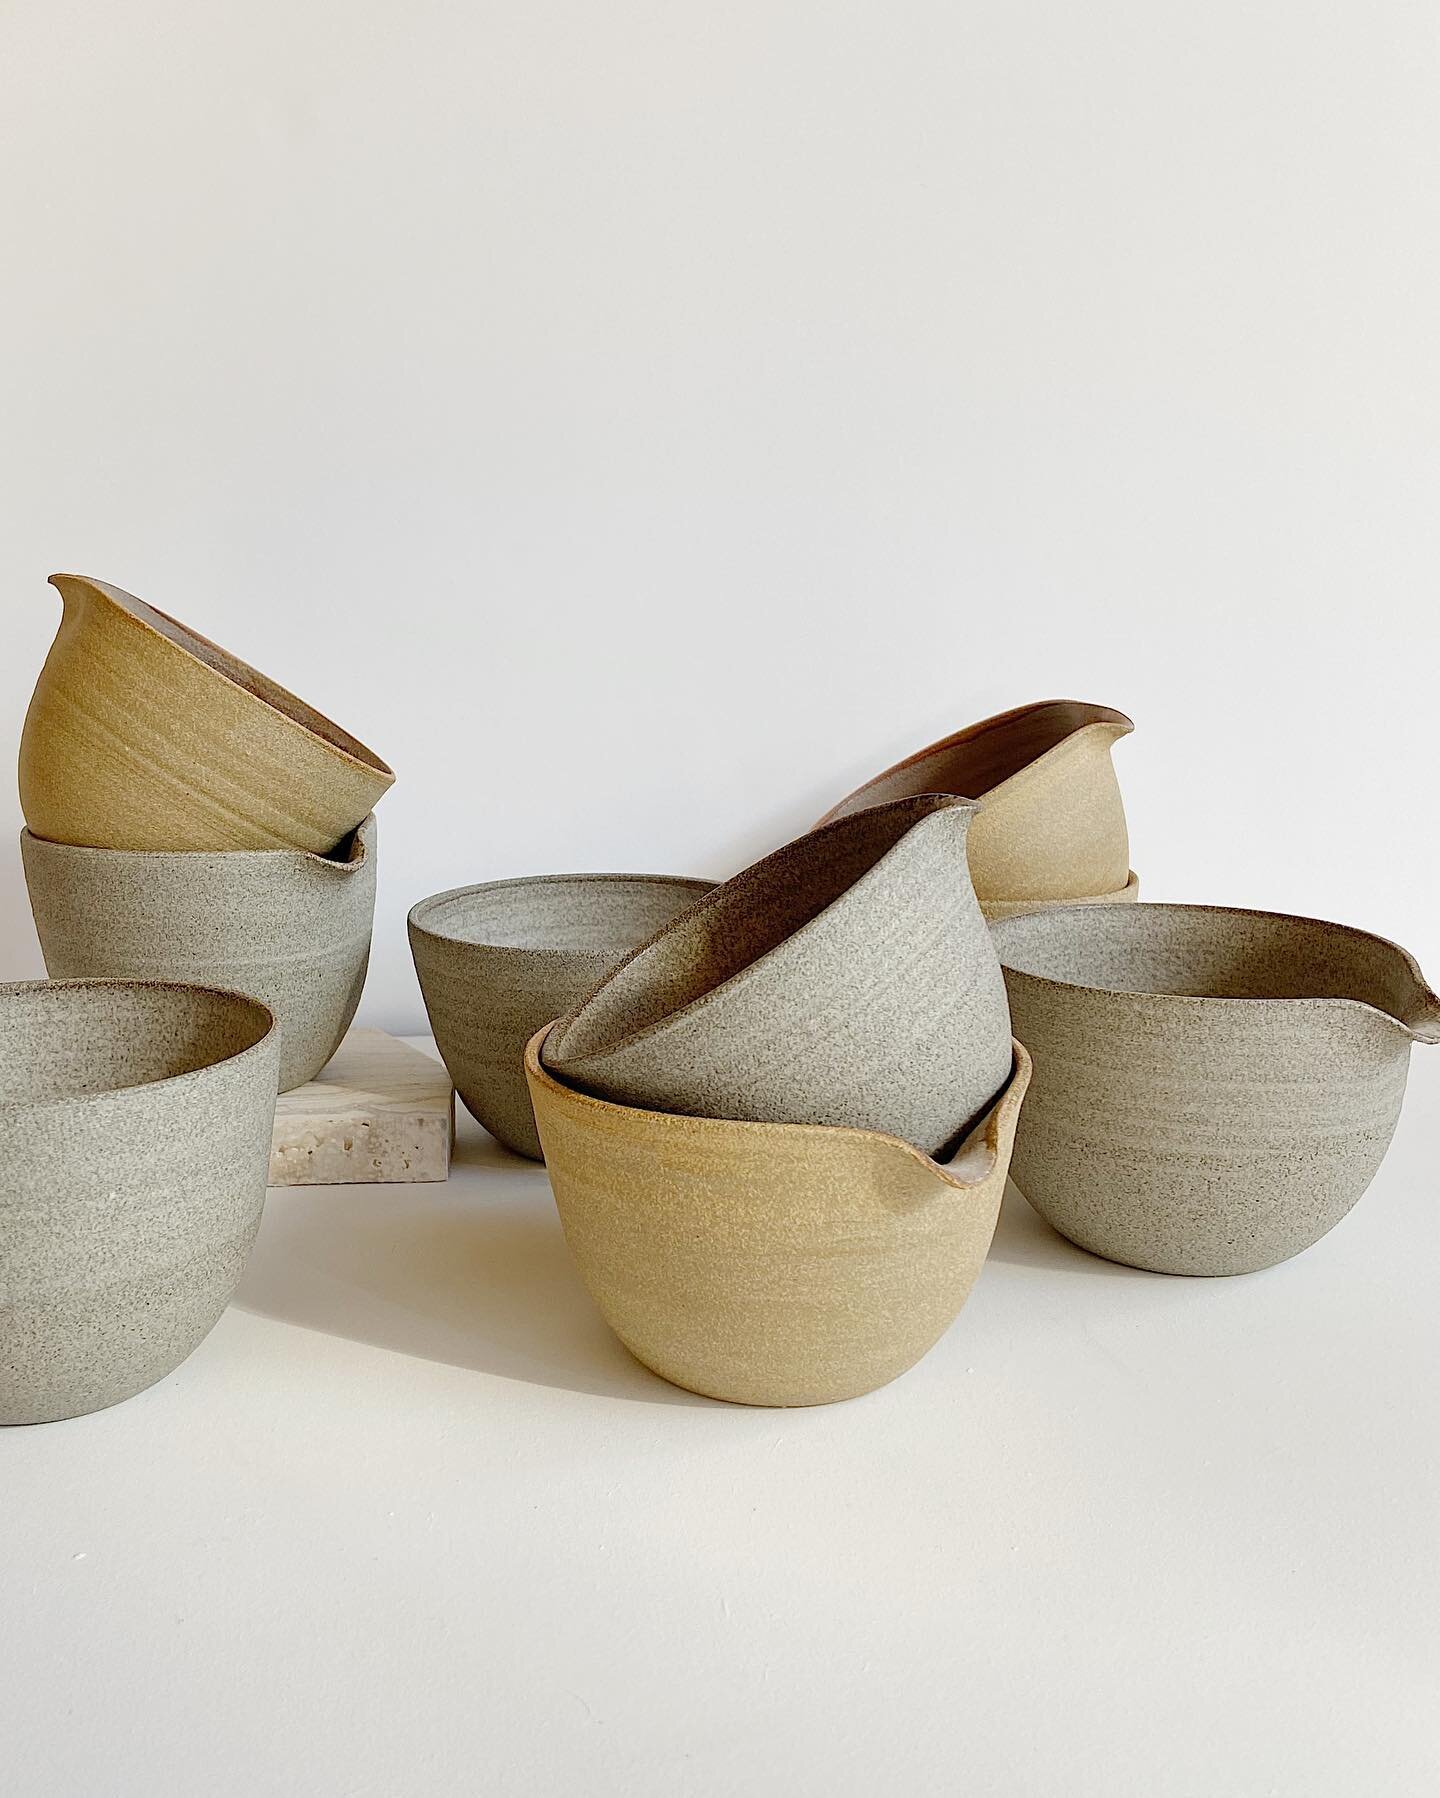 c e r a m i c s
spouted bowls &bull; in &lsquo;earth&rsquo; and &lsquo;stone grey&rsquo; 

available at the beautiful store @ateliersukha 
&bull;
&bull;
#annemiekebootsceramics #ceramics #keramiek #throwing #handmade #pottery  #clay #bowl #natural #a